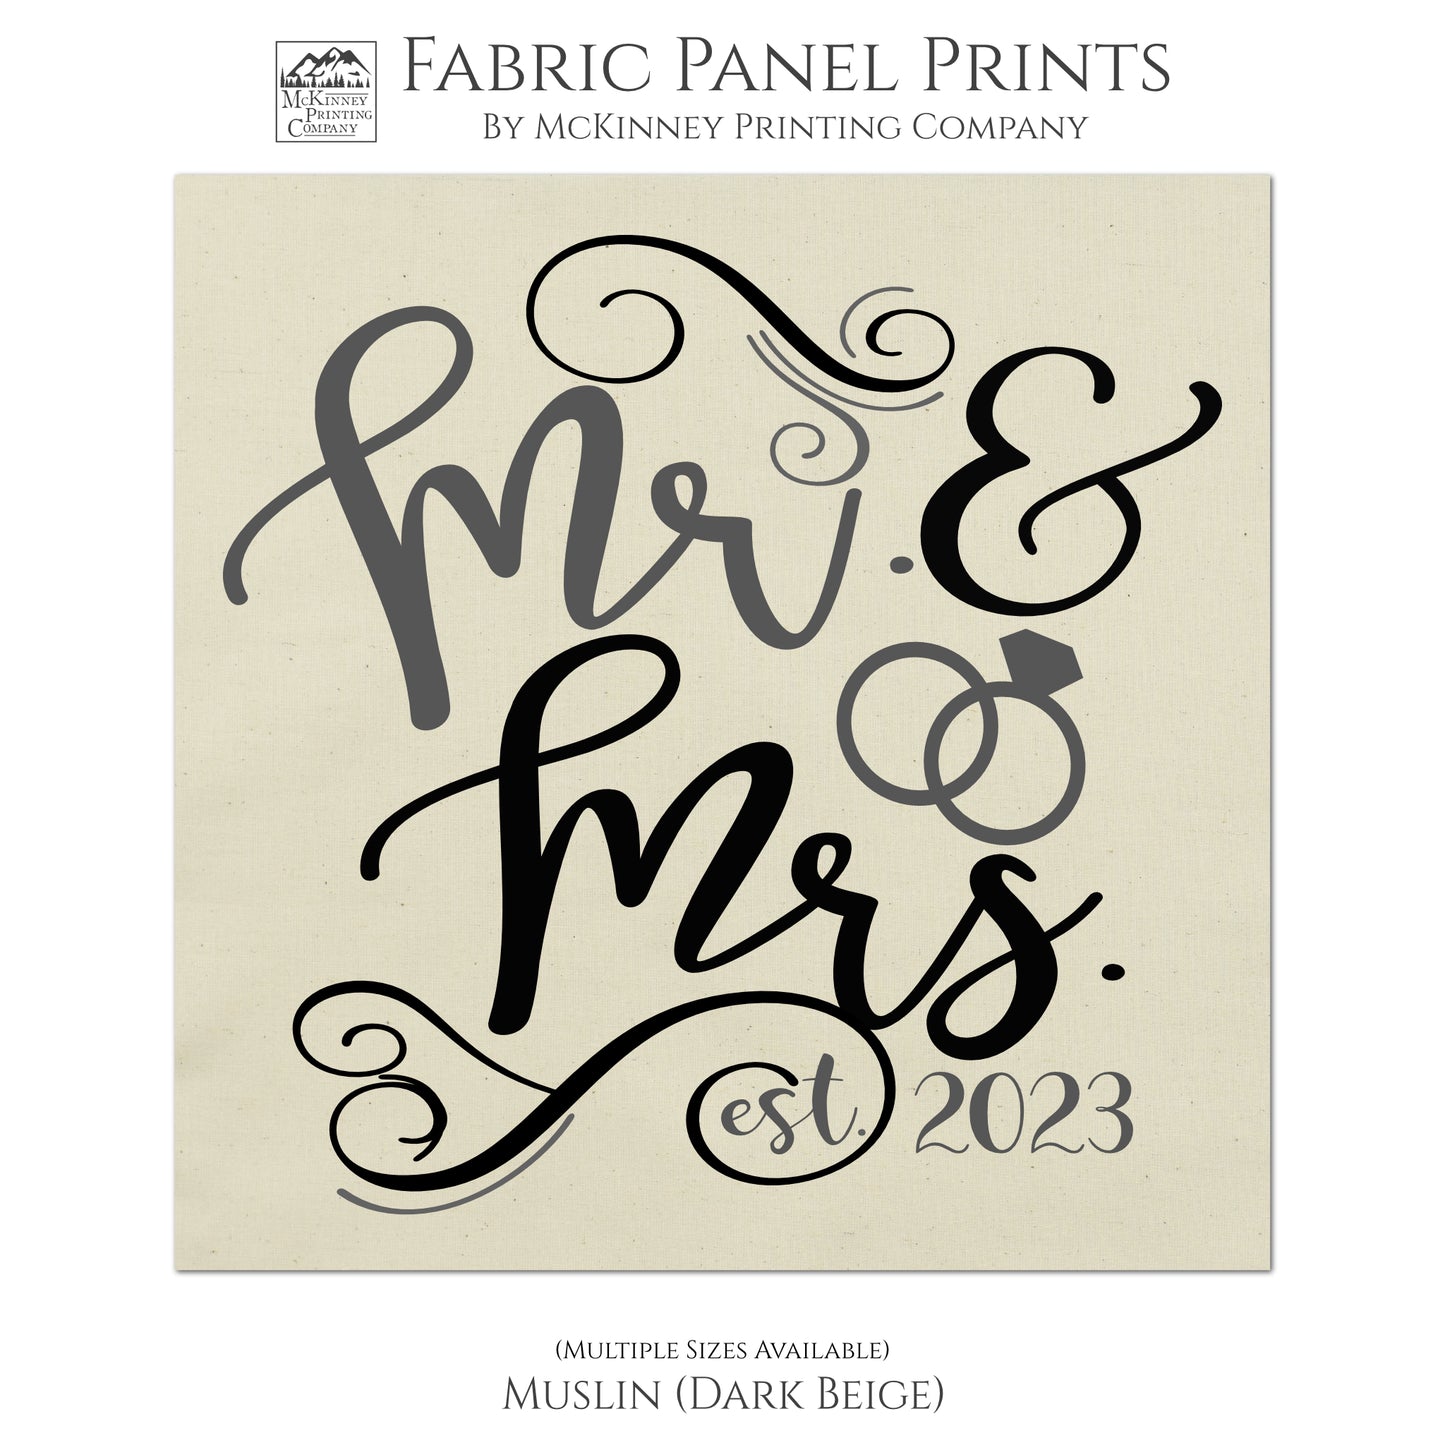 Mr. & Mrs. - Personalized Date, Custom Fabric Panel Print - Wedding, Engagement, Moving In Together, Quilt - Muslin